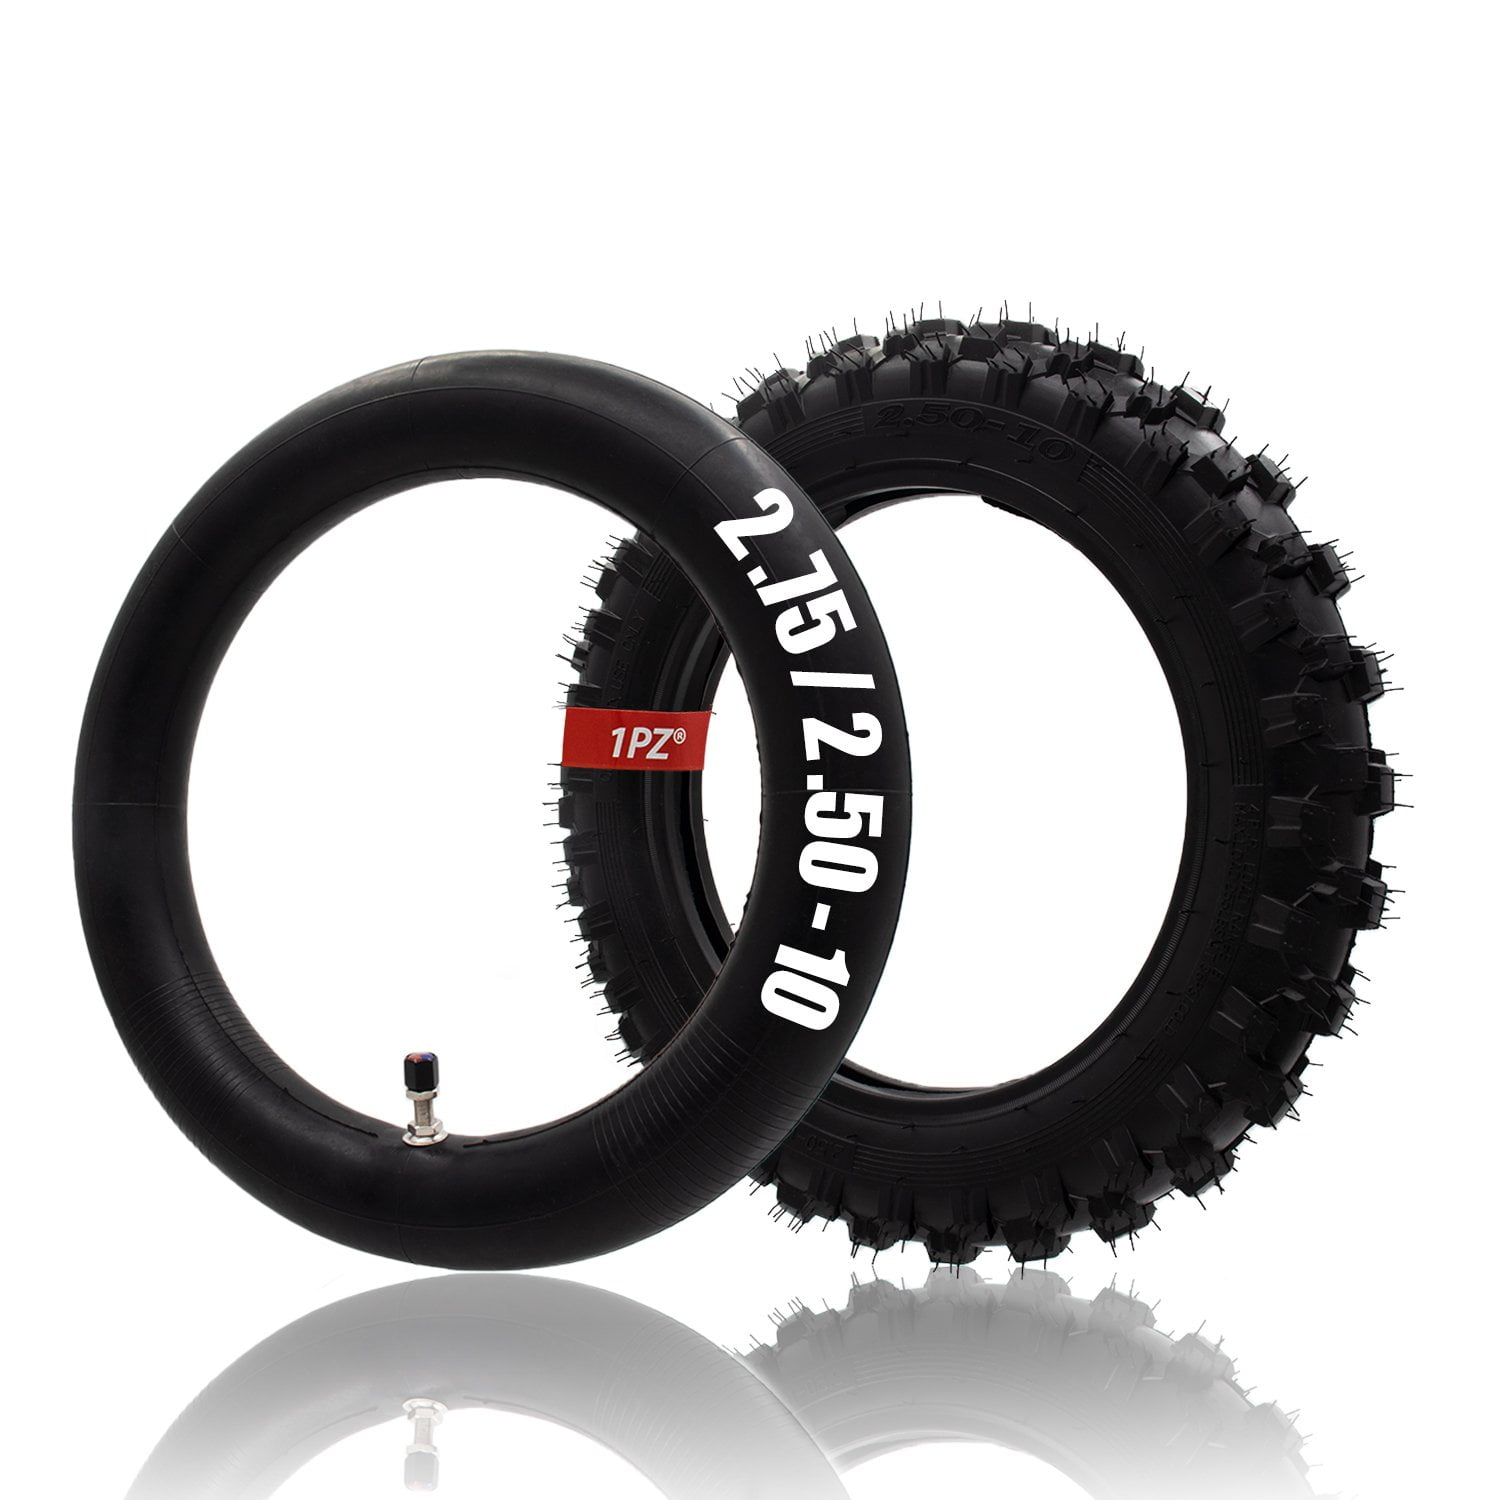 2.75-10 Knobby Tire and Inner Tube Set 50cc and More Suzuki DRZ70/JR 50 Replacement Off-road Tire and Tube for Most 49cc 1 Set Highly Compatible with Honda CRF50/XR50 and 70cc Dirt Bikes 